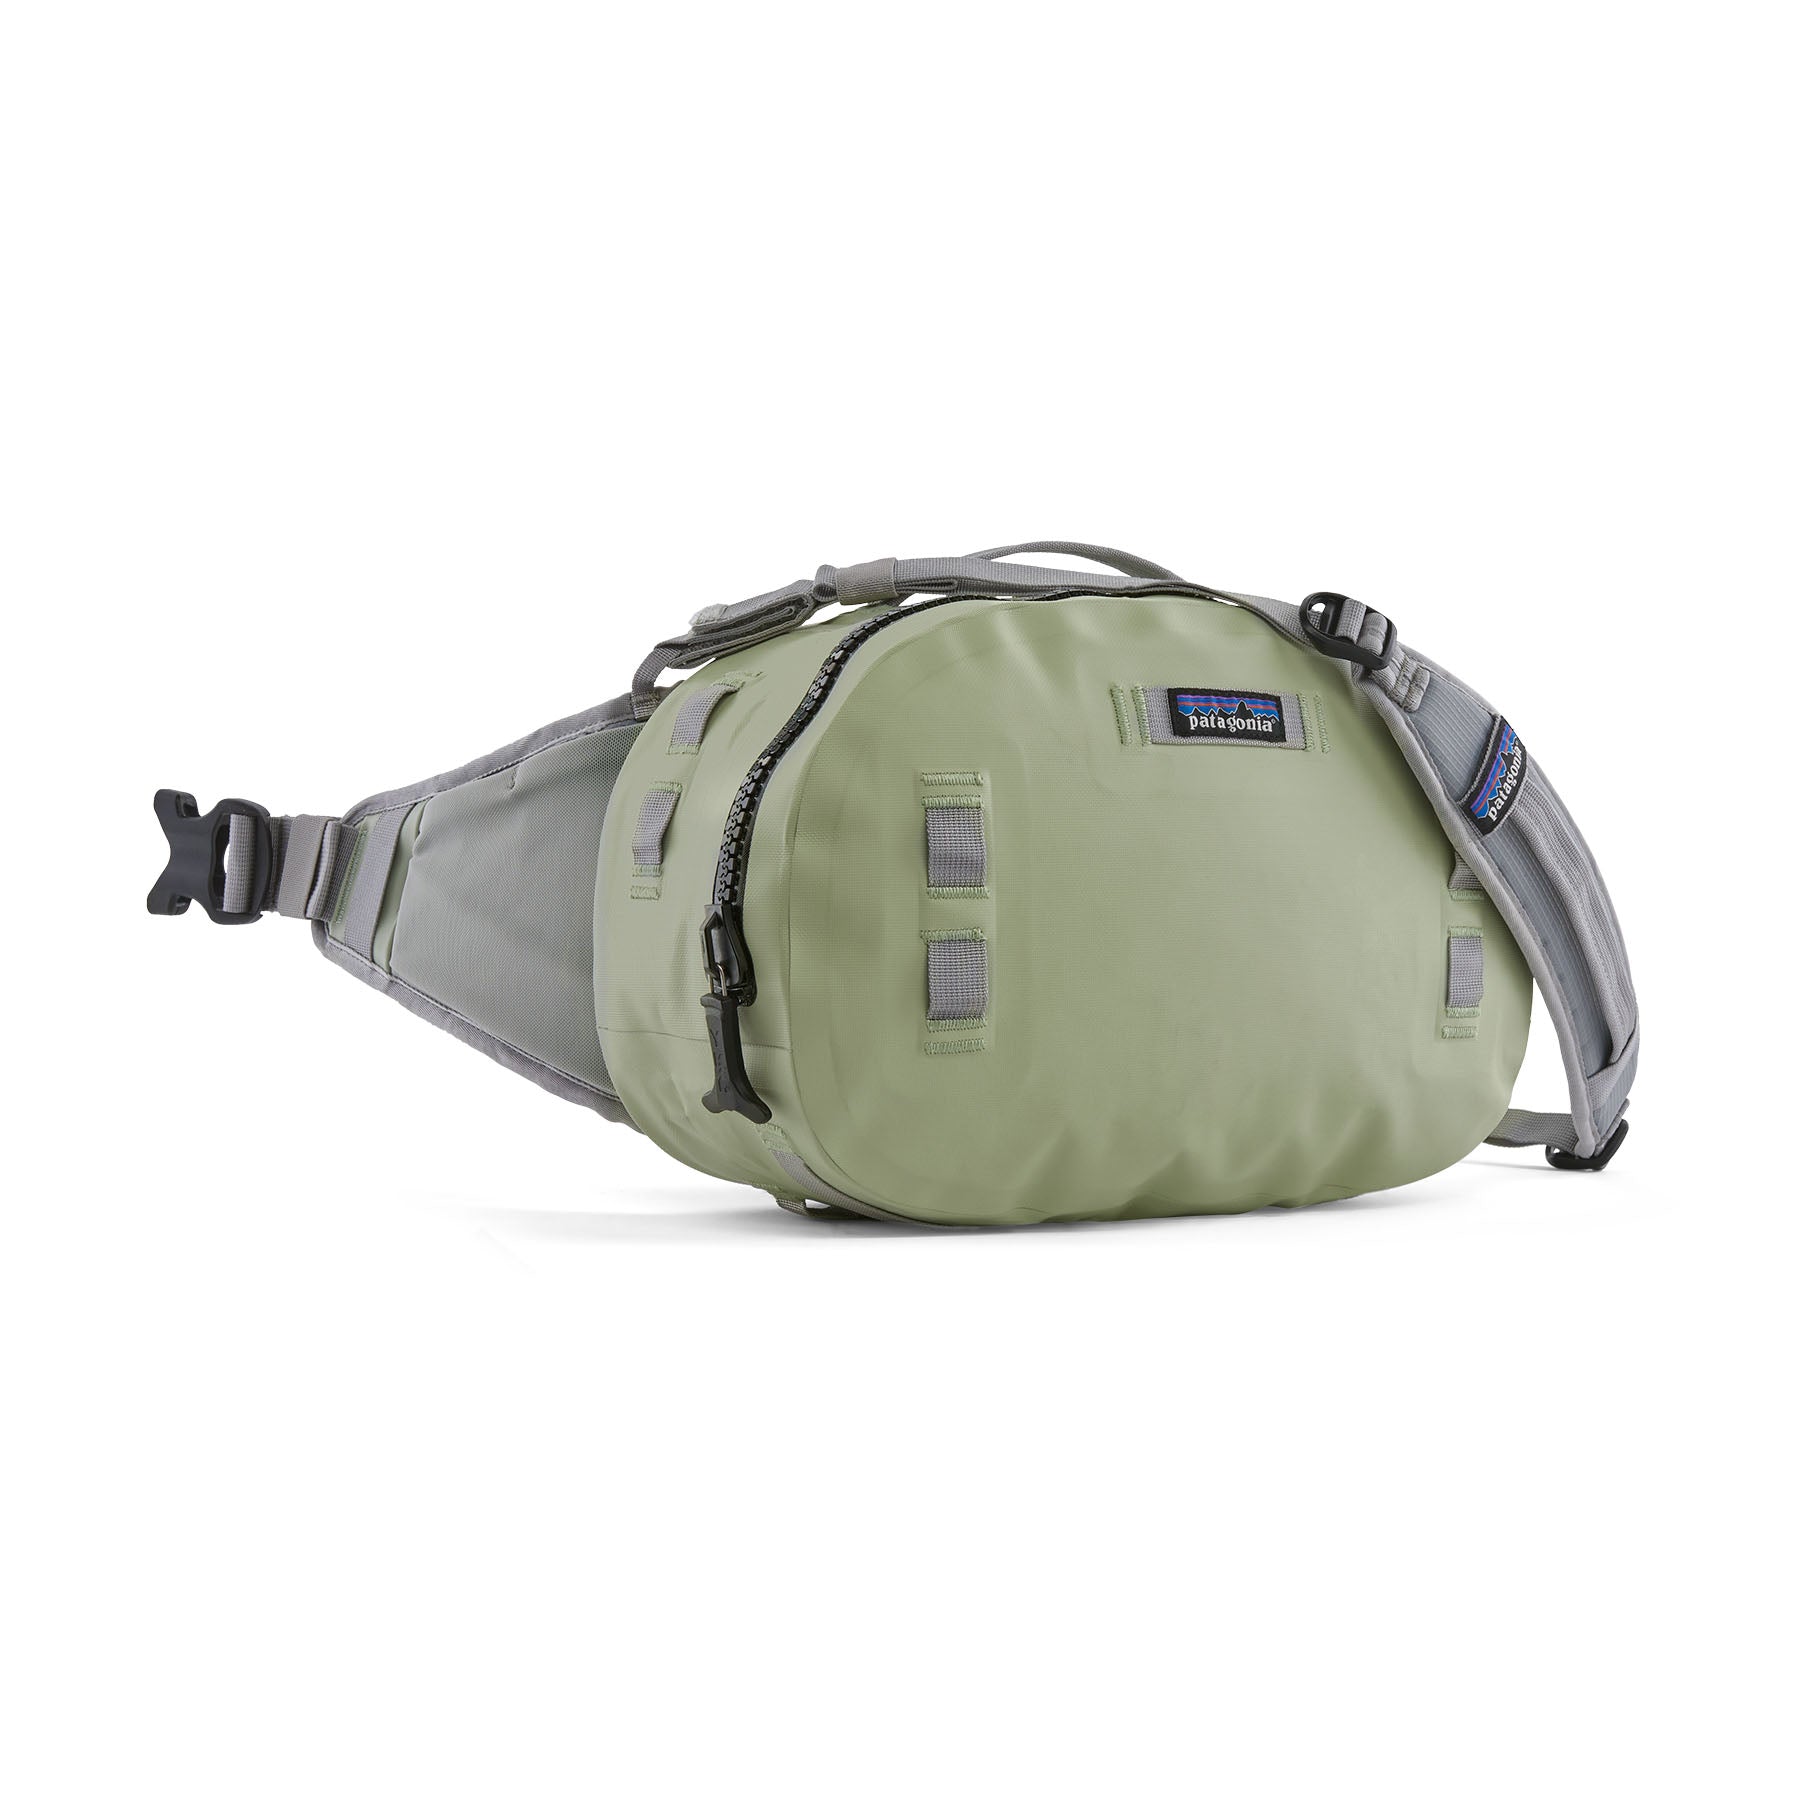 Patagonia Guidewater Hip Pack - Fin & Fire Fly Shop